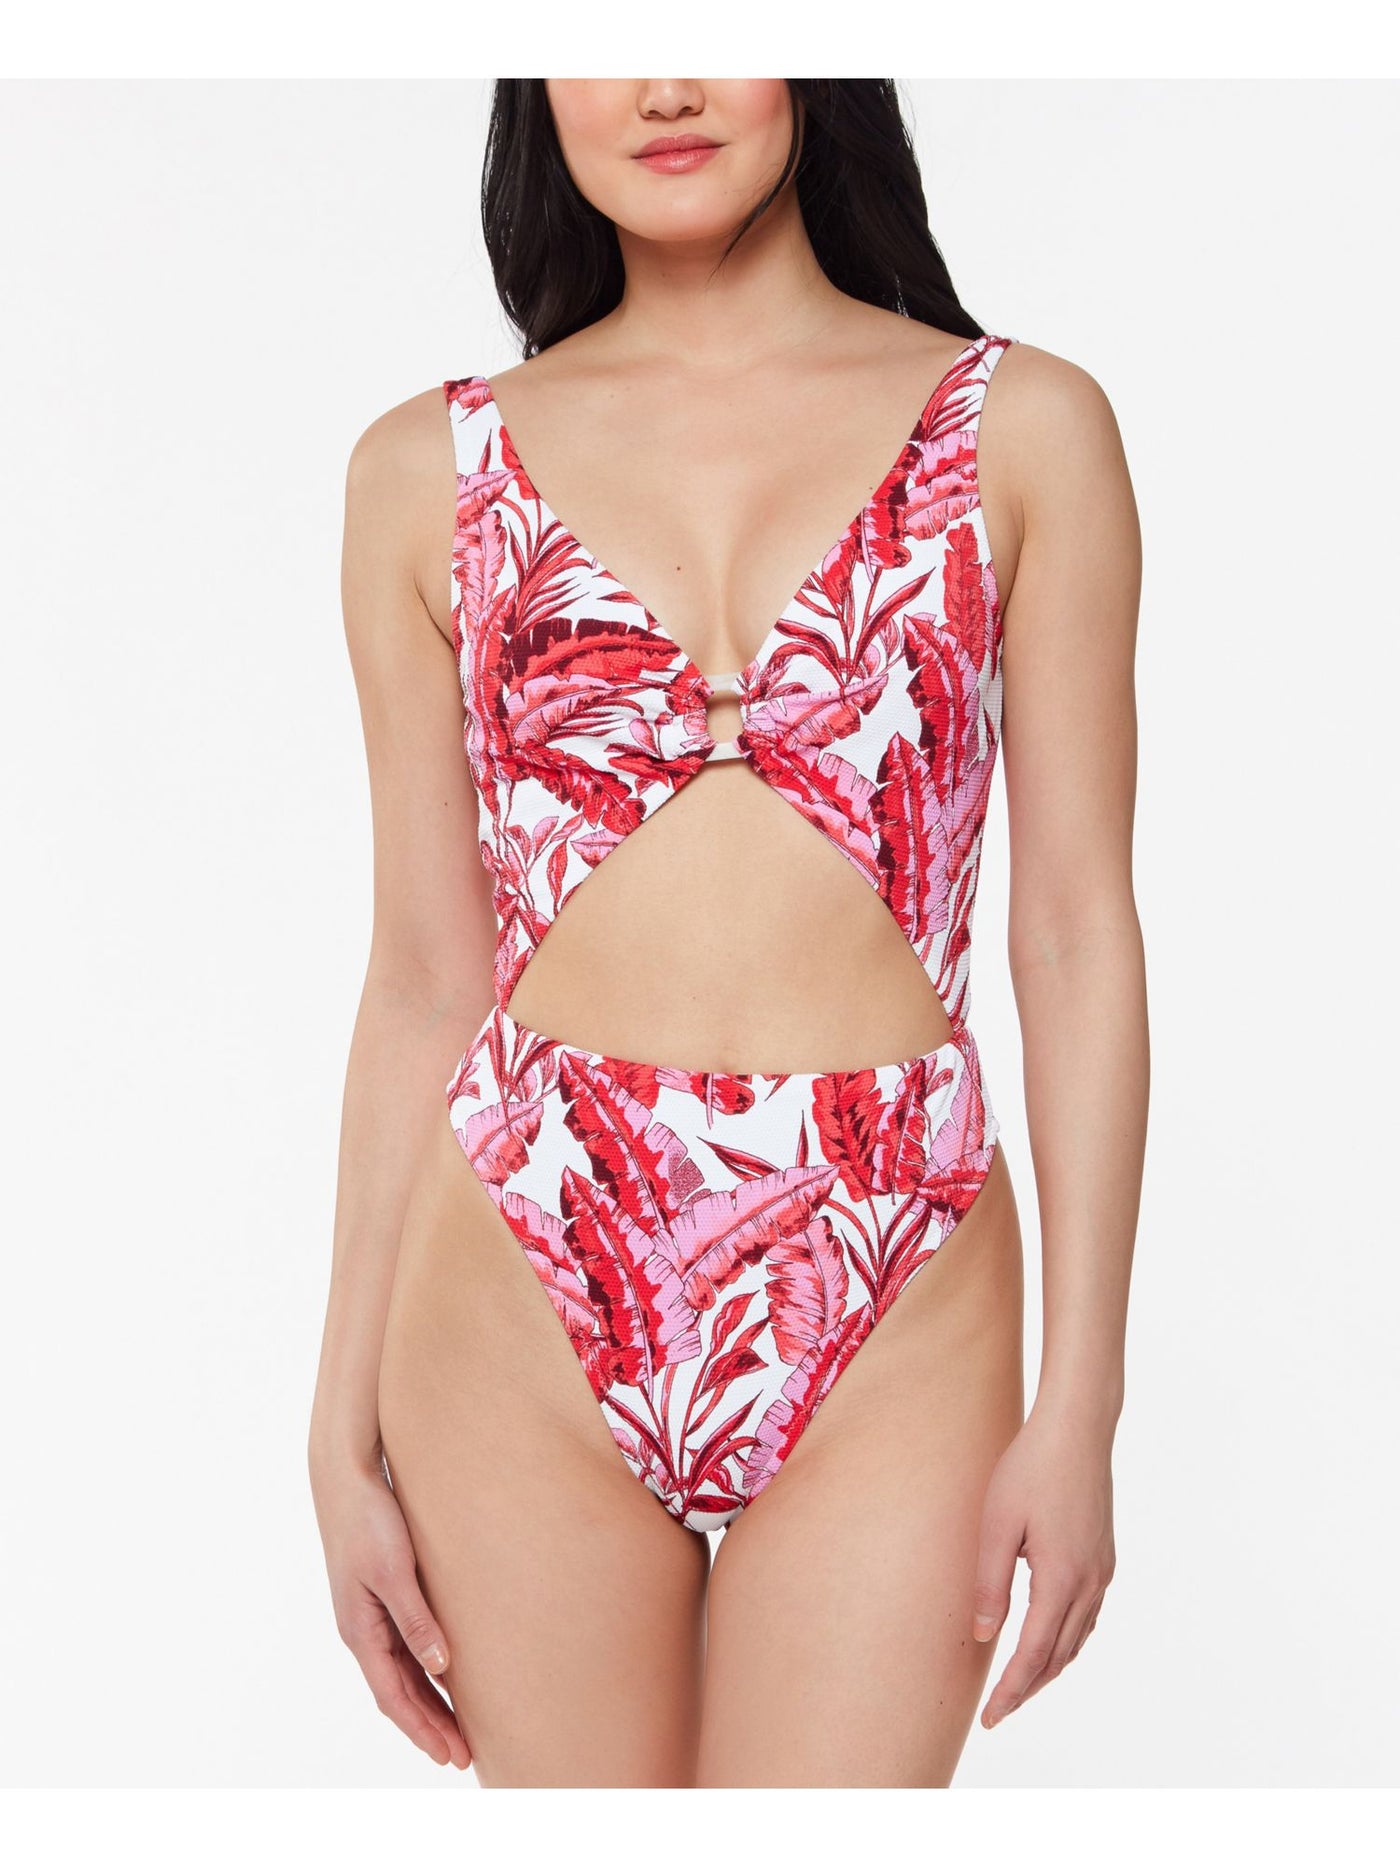 JESSICA SIMPSON Women's Pink Printed Stretch Push-Up Front And Back Front O-Ring Deep V Neck Cutout One Piece Swimsuit M